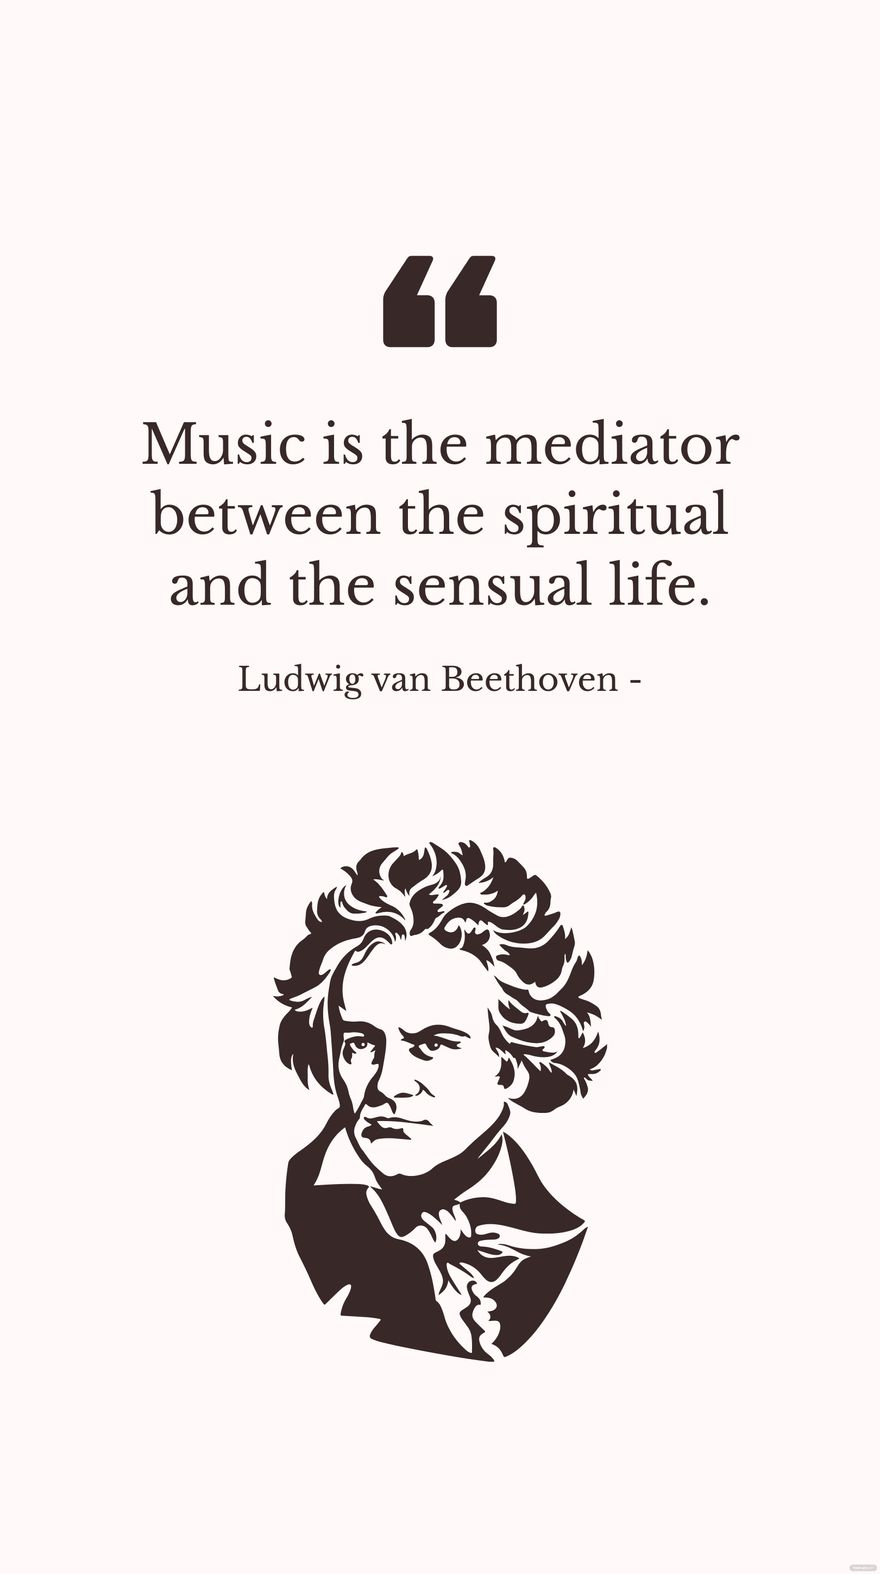 Ludwig van Beethoven - Music is the mediator between the spiritual and the sensual life.